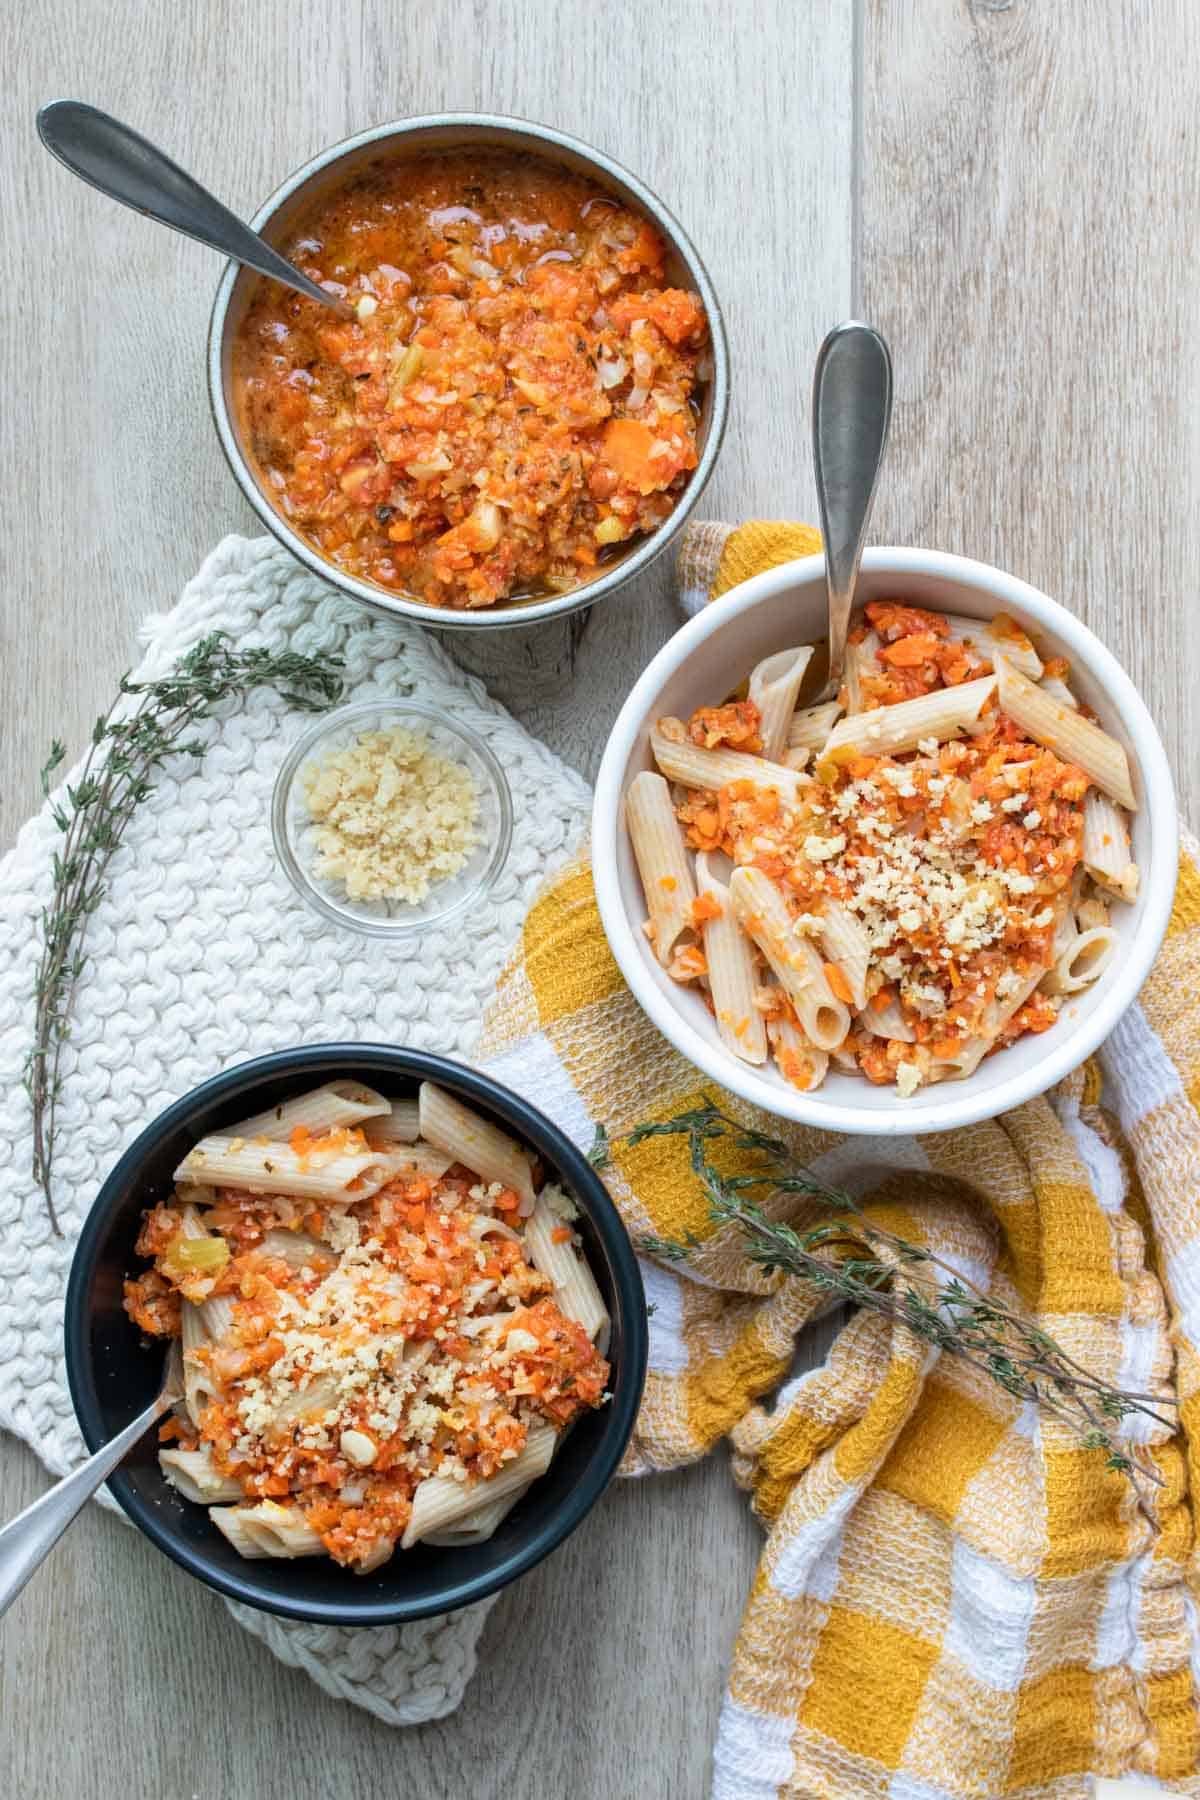 Three bowls on a wooden surface filled with penne pasta and veggie pasta sauce